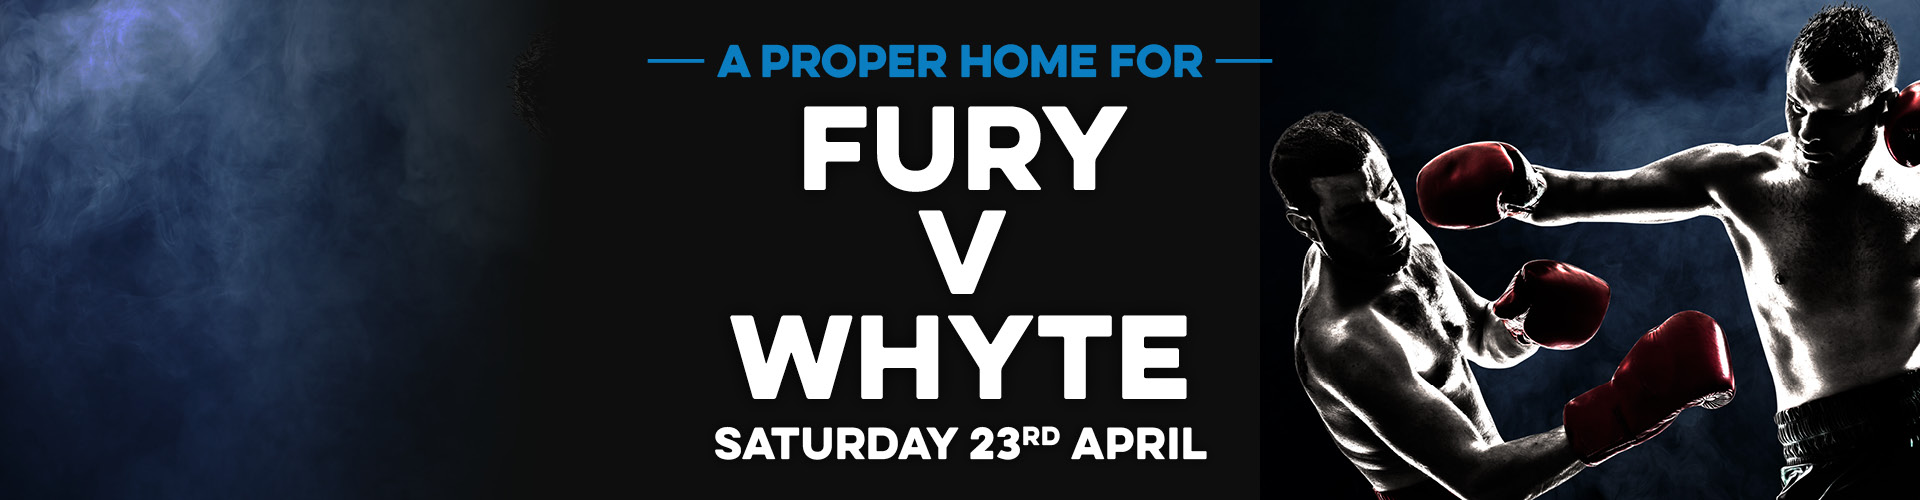 Watch Fury vs Whyte live in Chester